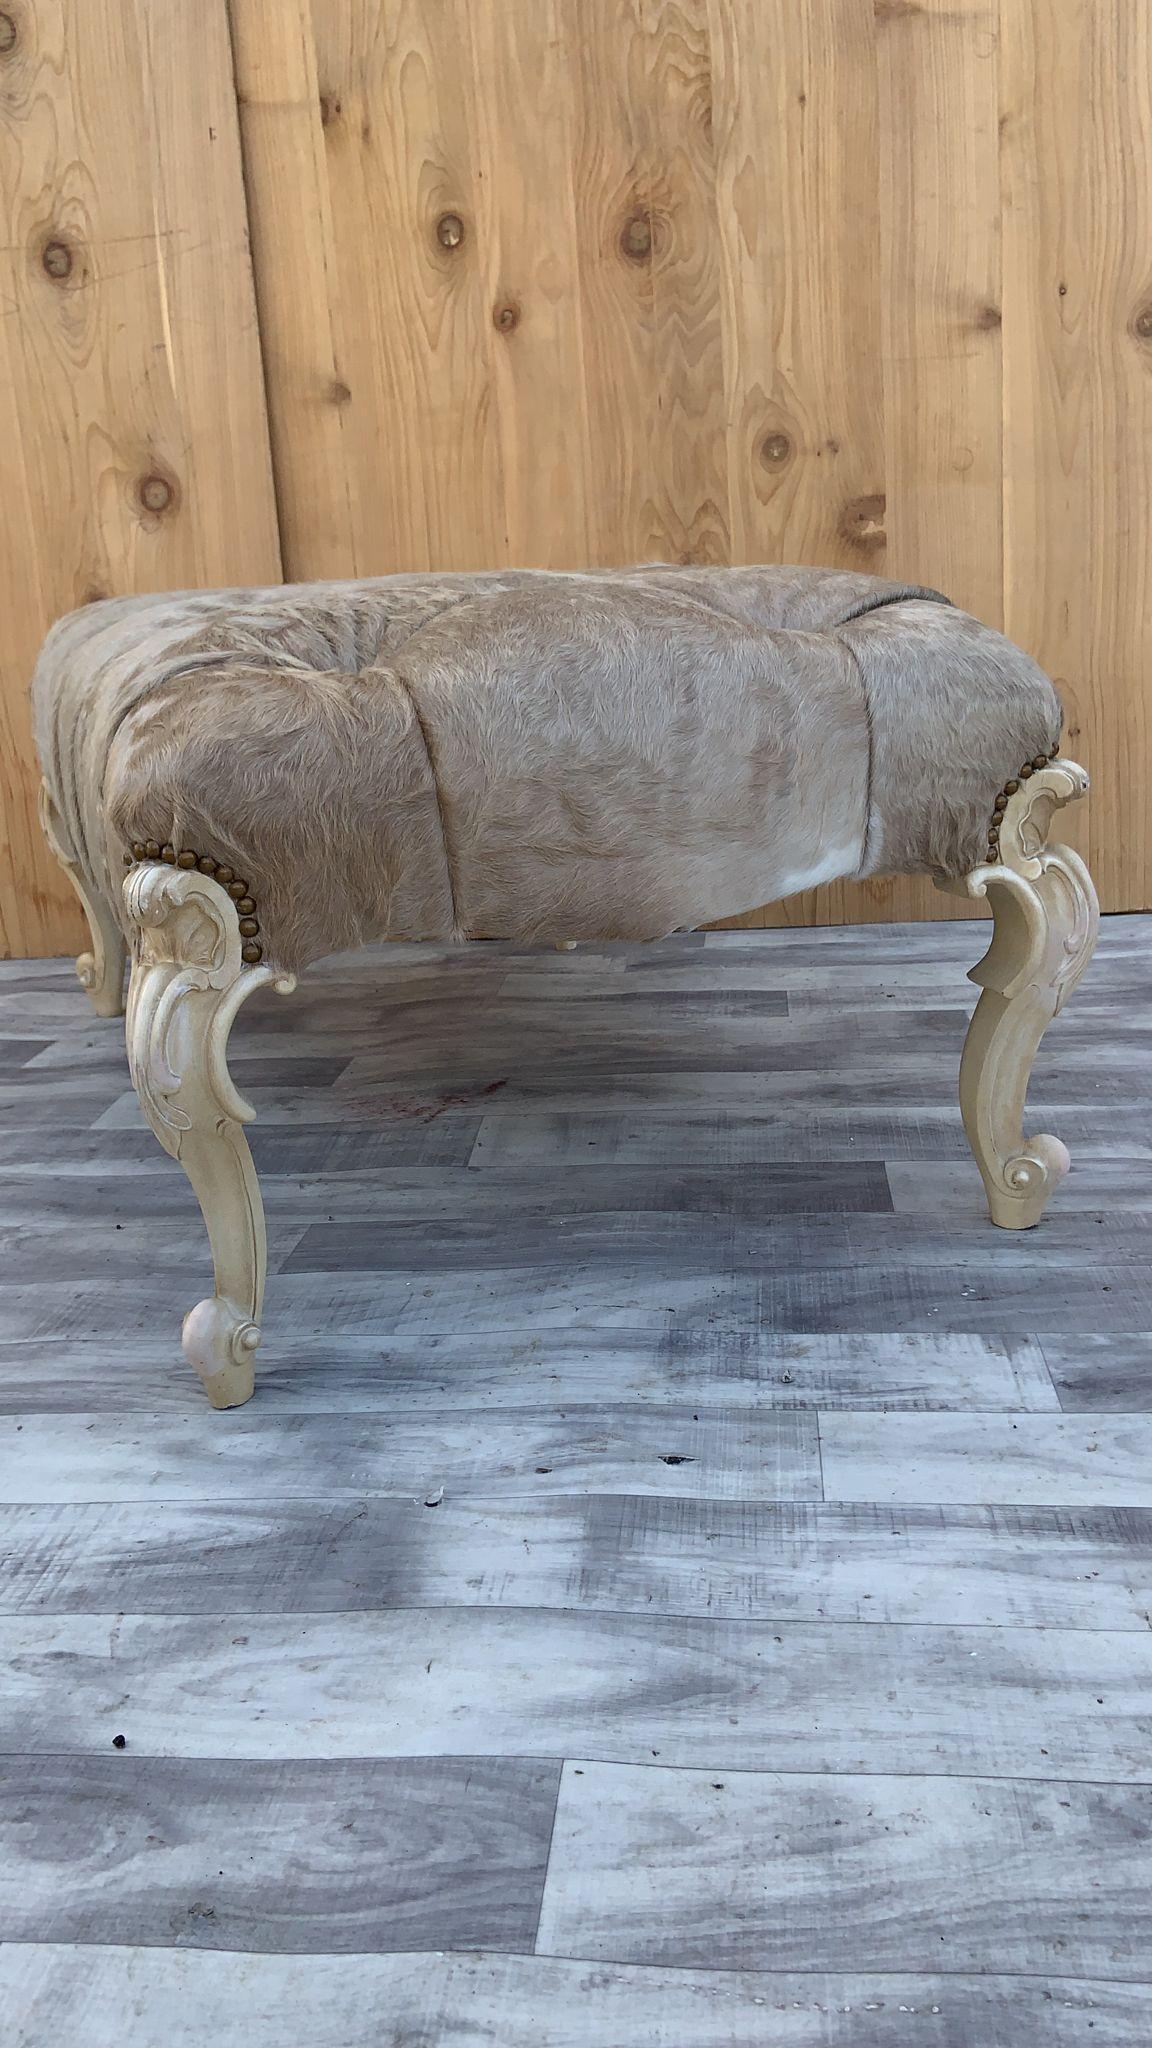 Vintage French Provincial Style Ottoman with Hand Carved Cabriole Legs Newly Upholstery in a Brazilian Cowhide “Cafe Latte” Color

Beautiful French Provincial style ottoman with a cream painted ornate hand carved scrolled detailed cabriole legs. The